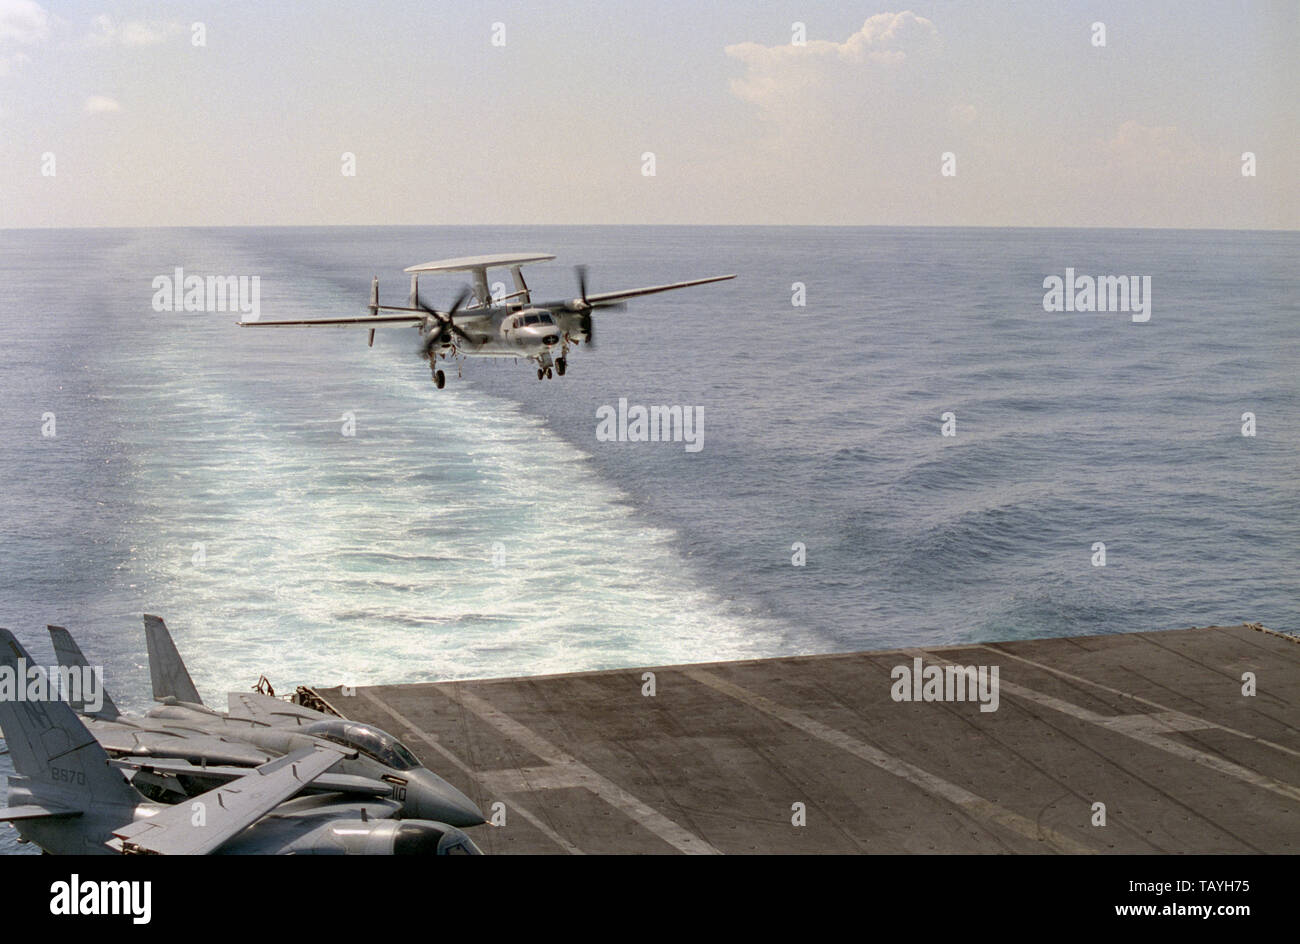 1st November 1993 Operation Continue Hope. An E-2C Hawkeye about to land on the U.S. Navy aircraft carrier USS Abraham Lincoln in the Indian Ocean, 50 miles off Mogadishu, Somalia. Stock Photo